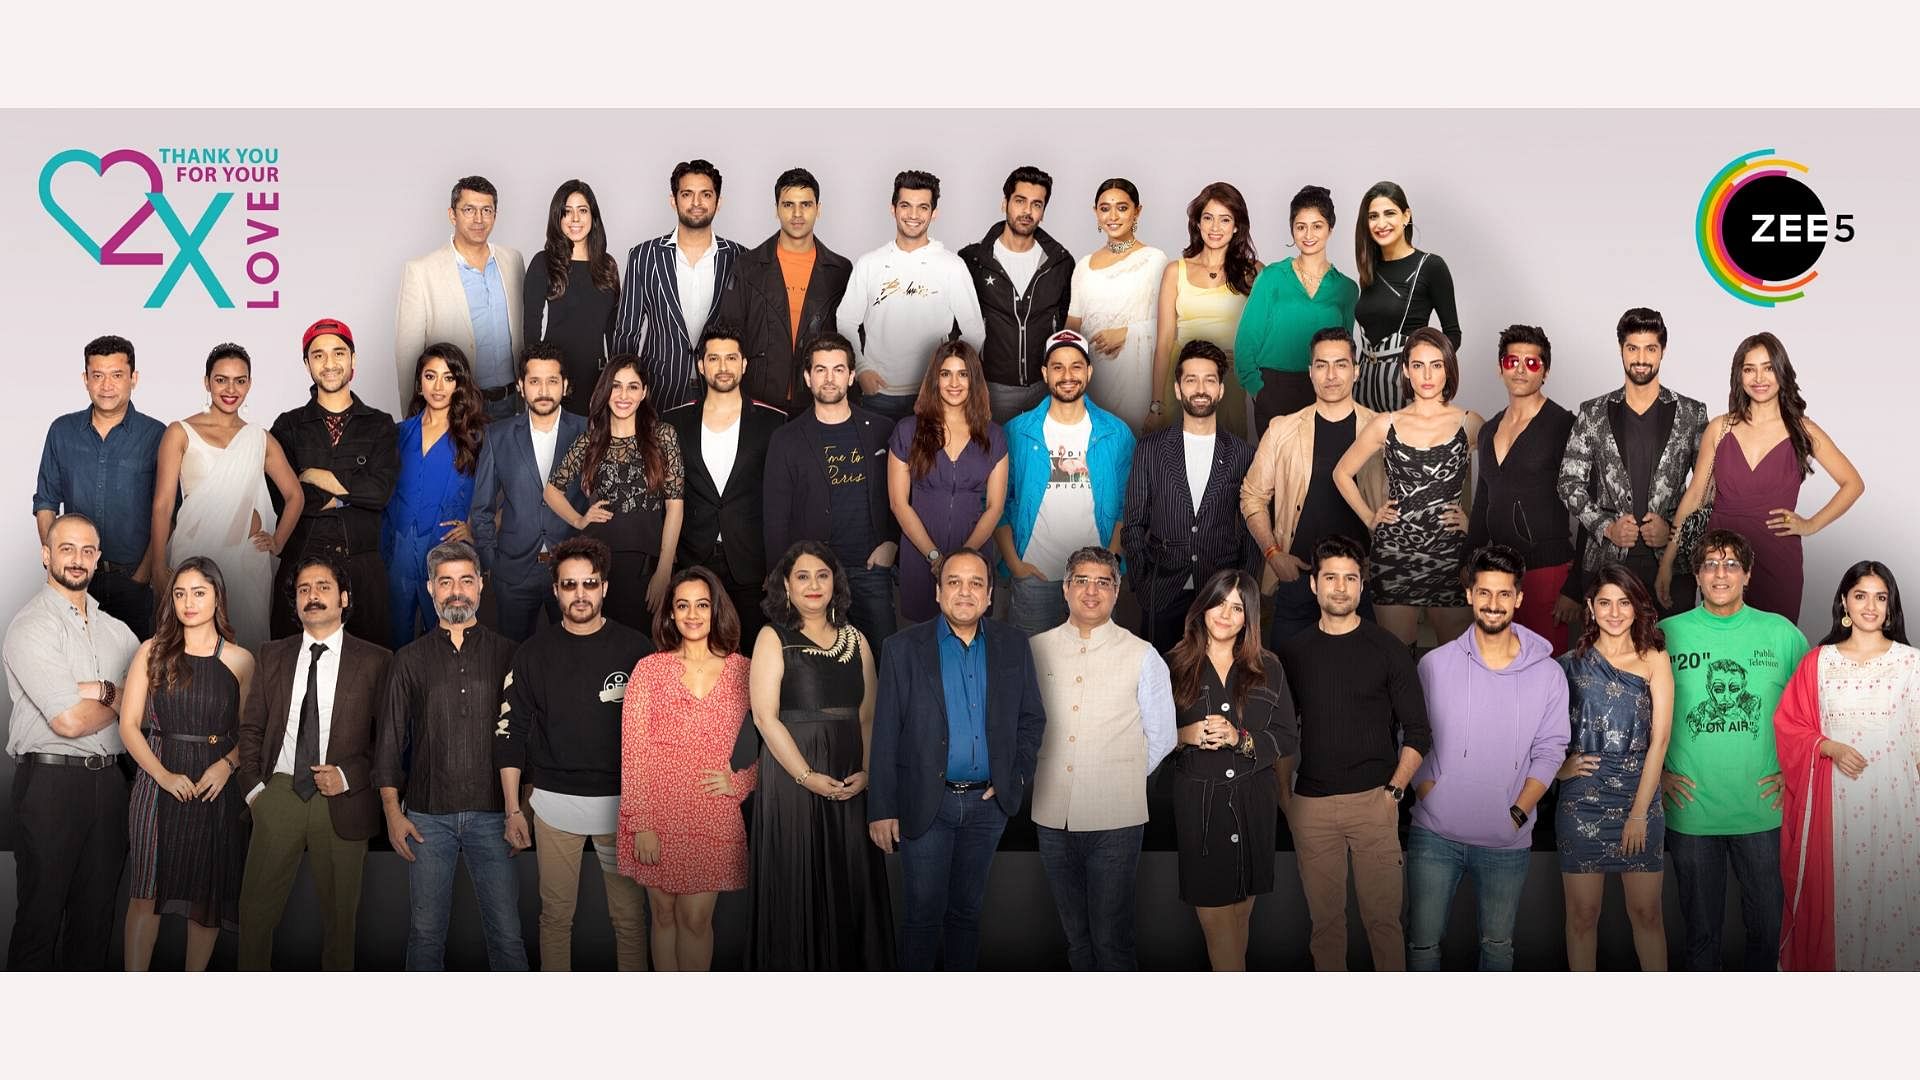 ZEE5 has emerged as India’s go-to entertainment hub.